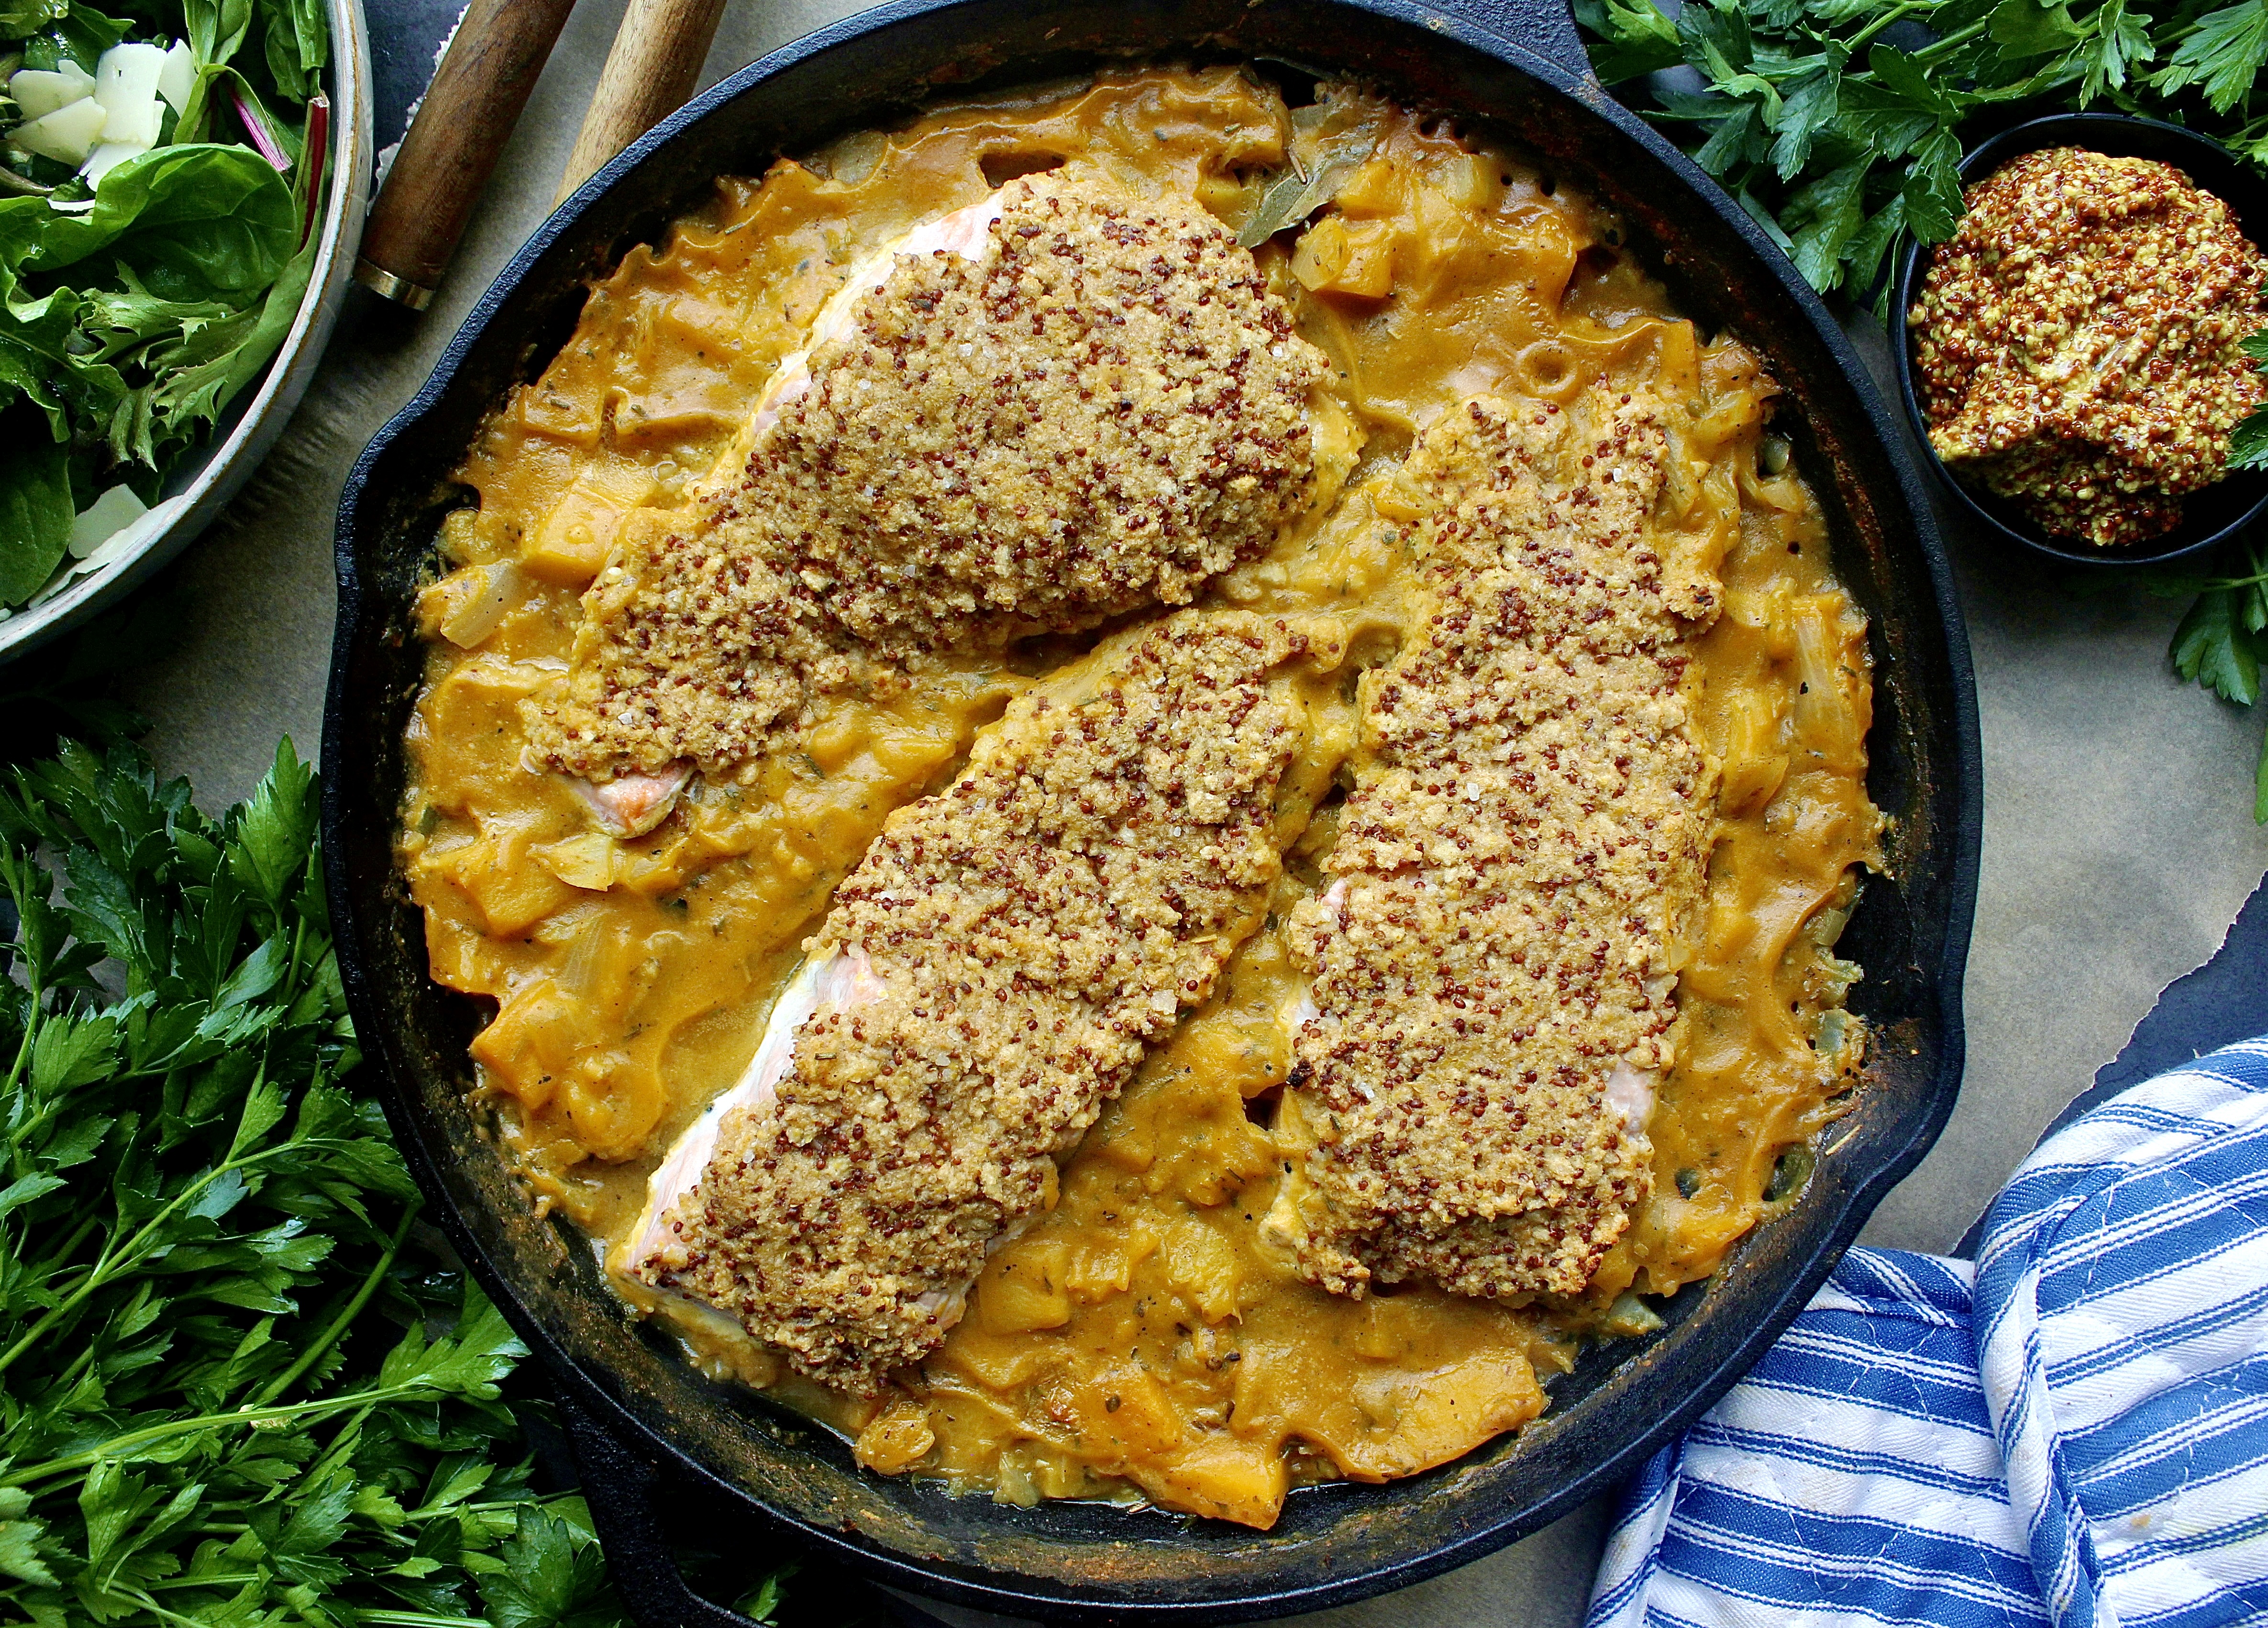 A healthy creamy mustard sauce baked up with butternut squash and crispy maple mustard crusted salmon: this Dijon Maple Crusted Salmon and Butternut Squash  is out of this world amazing!!!